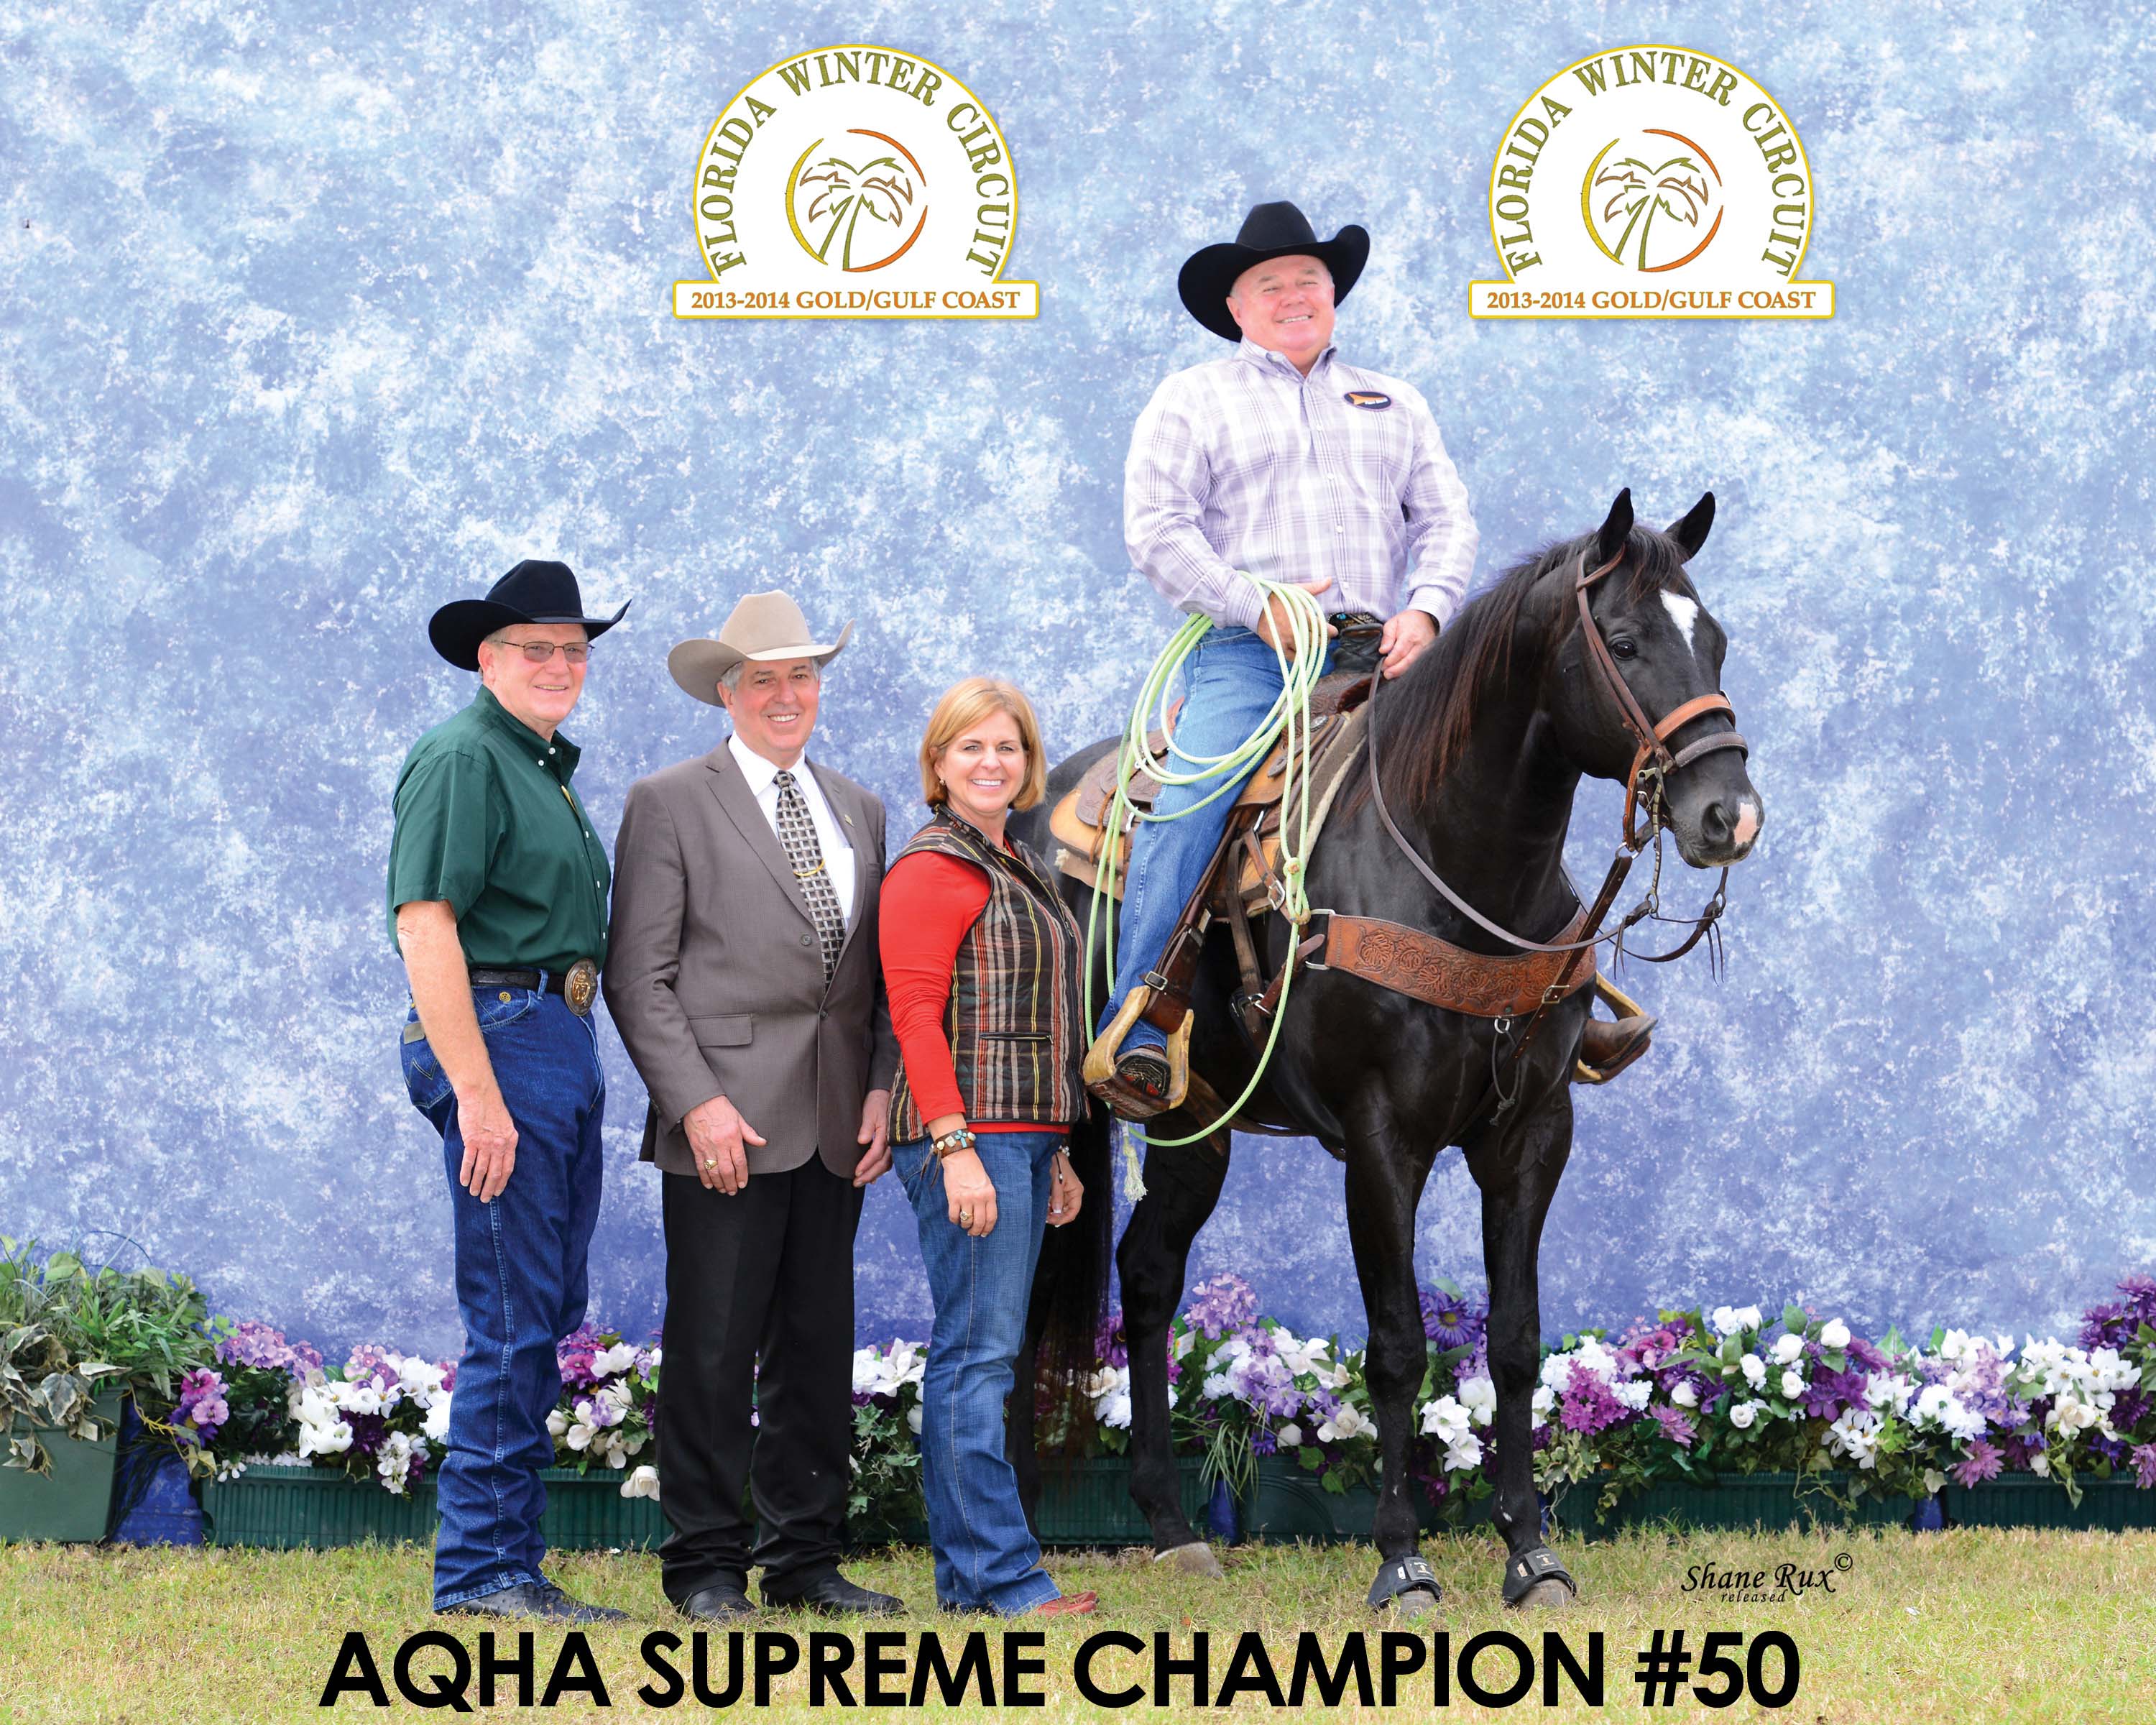 Gotta Good Habit became the 50th  AQHA Supreme Champion in 2013, after earning $23,261 and a 91 speed index on the track. His performance points came in heading, hunter under saddle, performance stallion and halter.